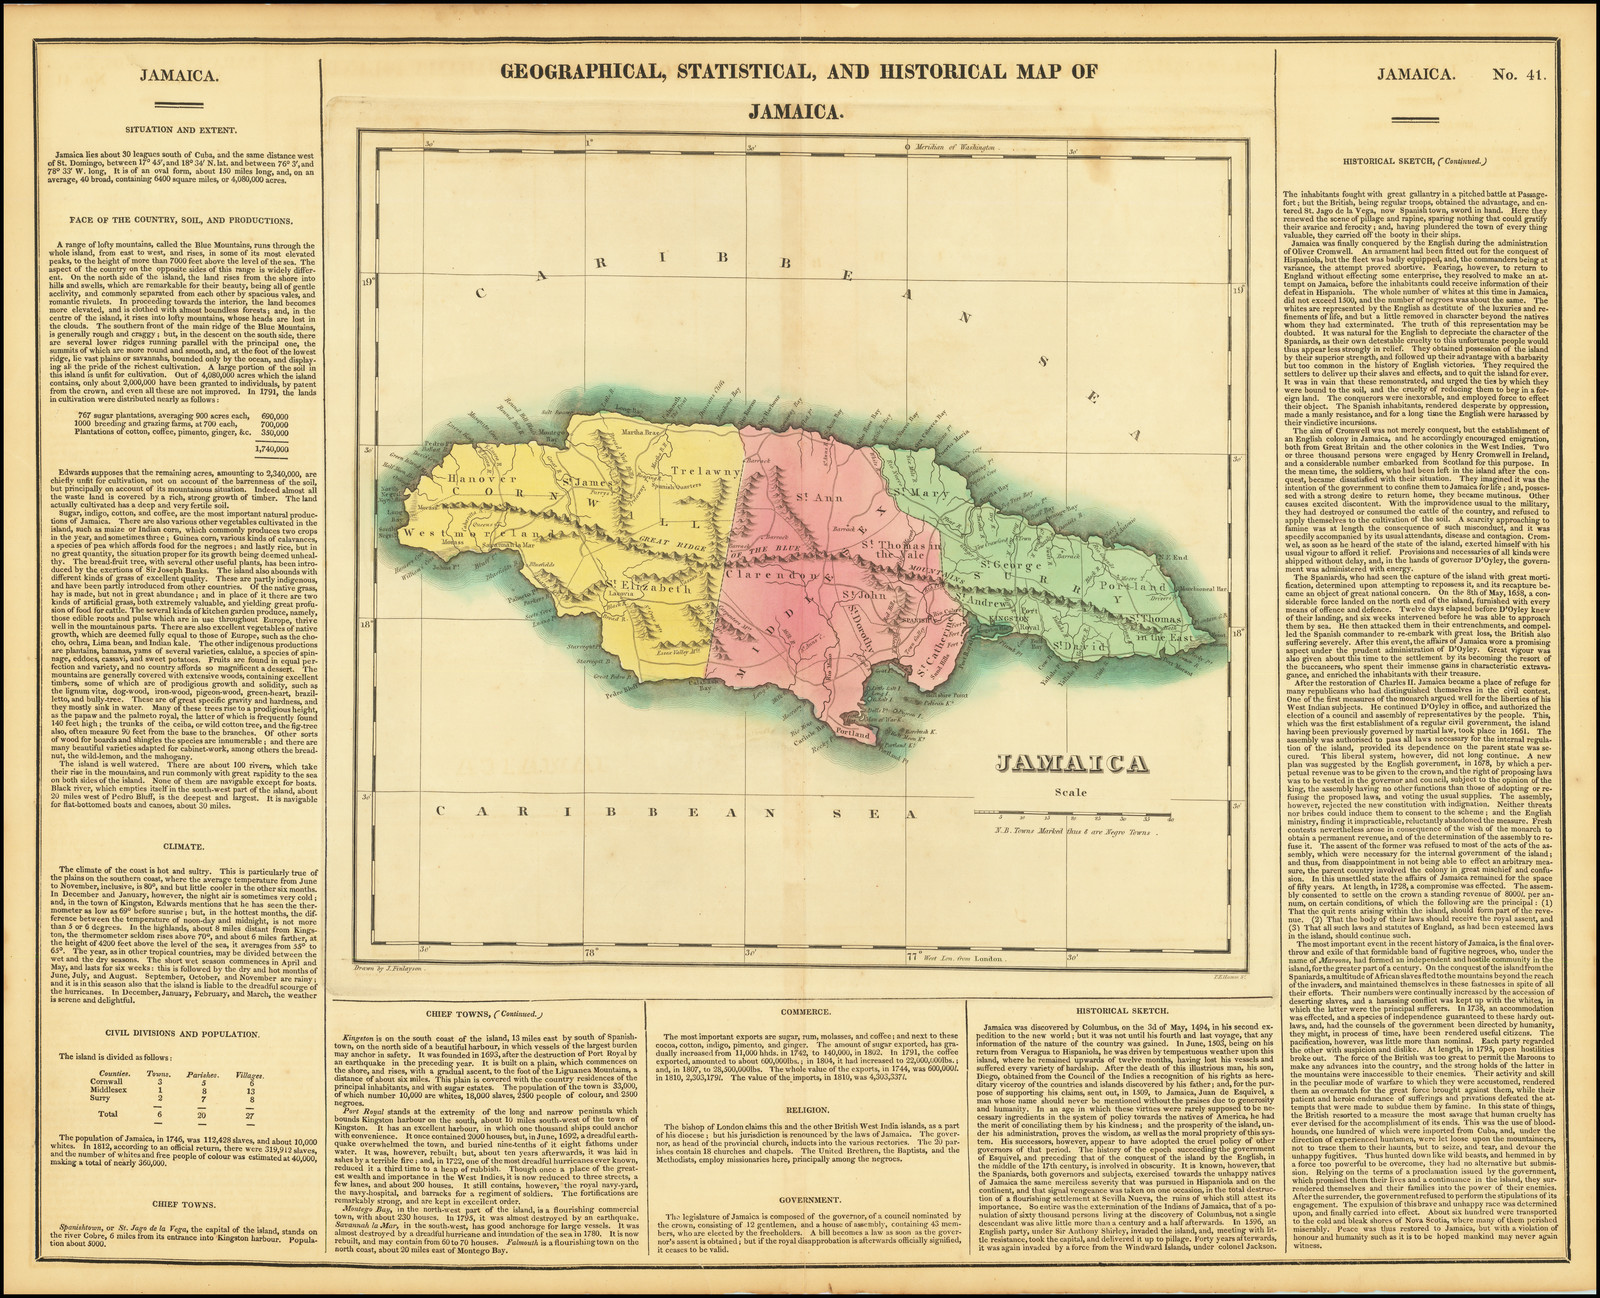 Geographical, Statistical and Historical Map of Jamaica